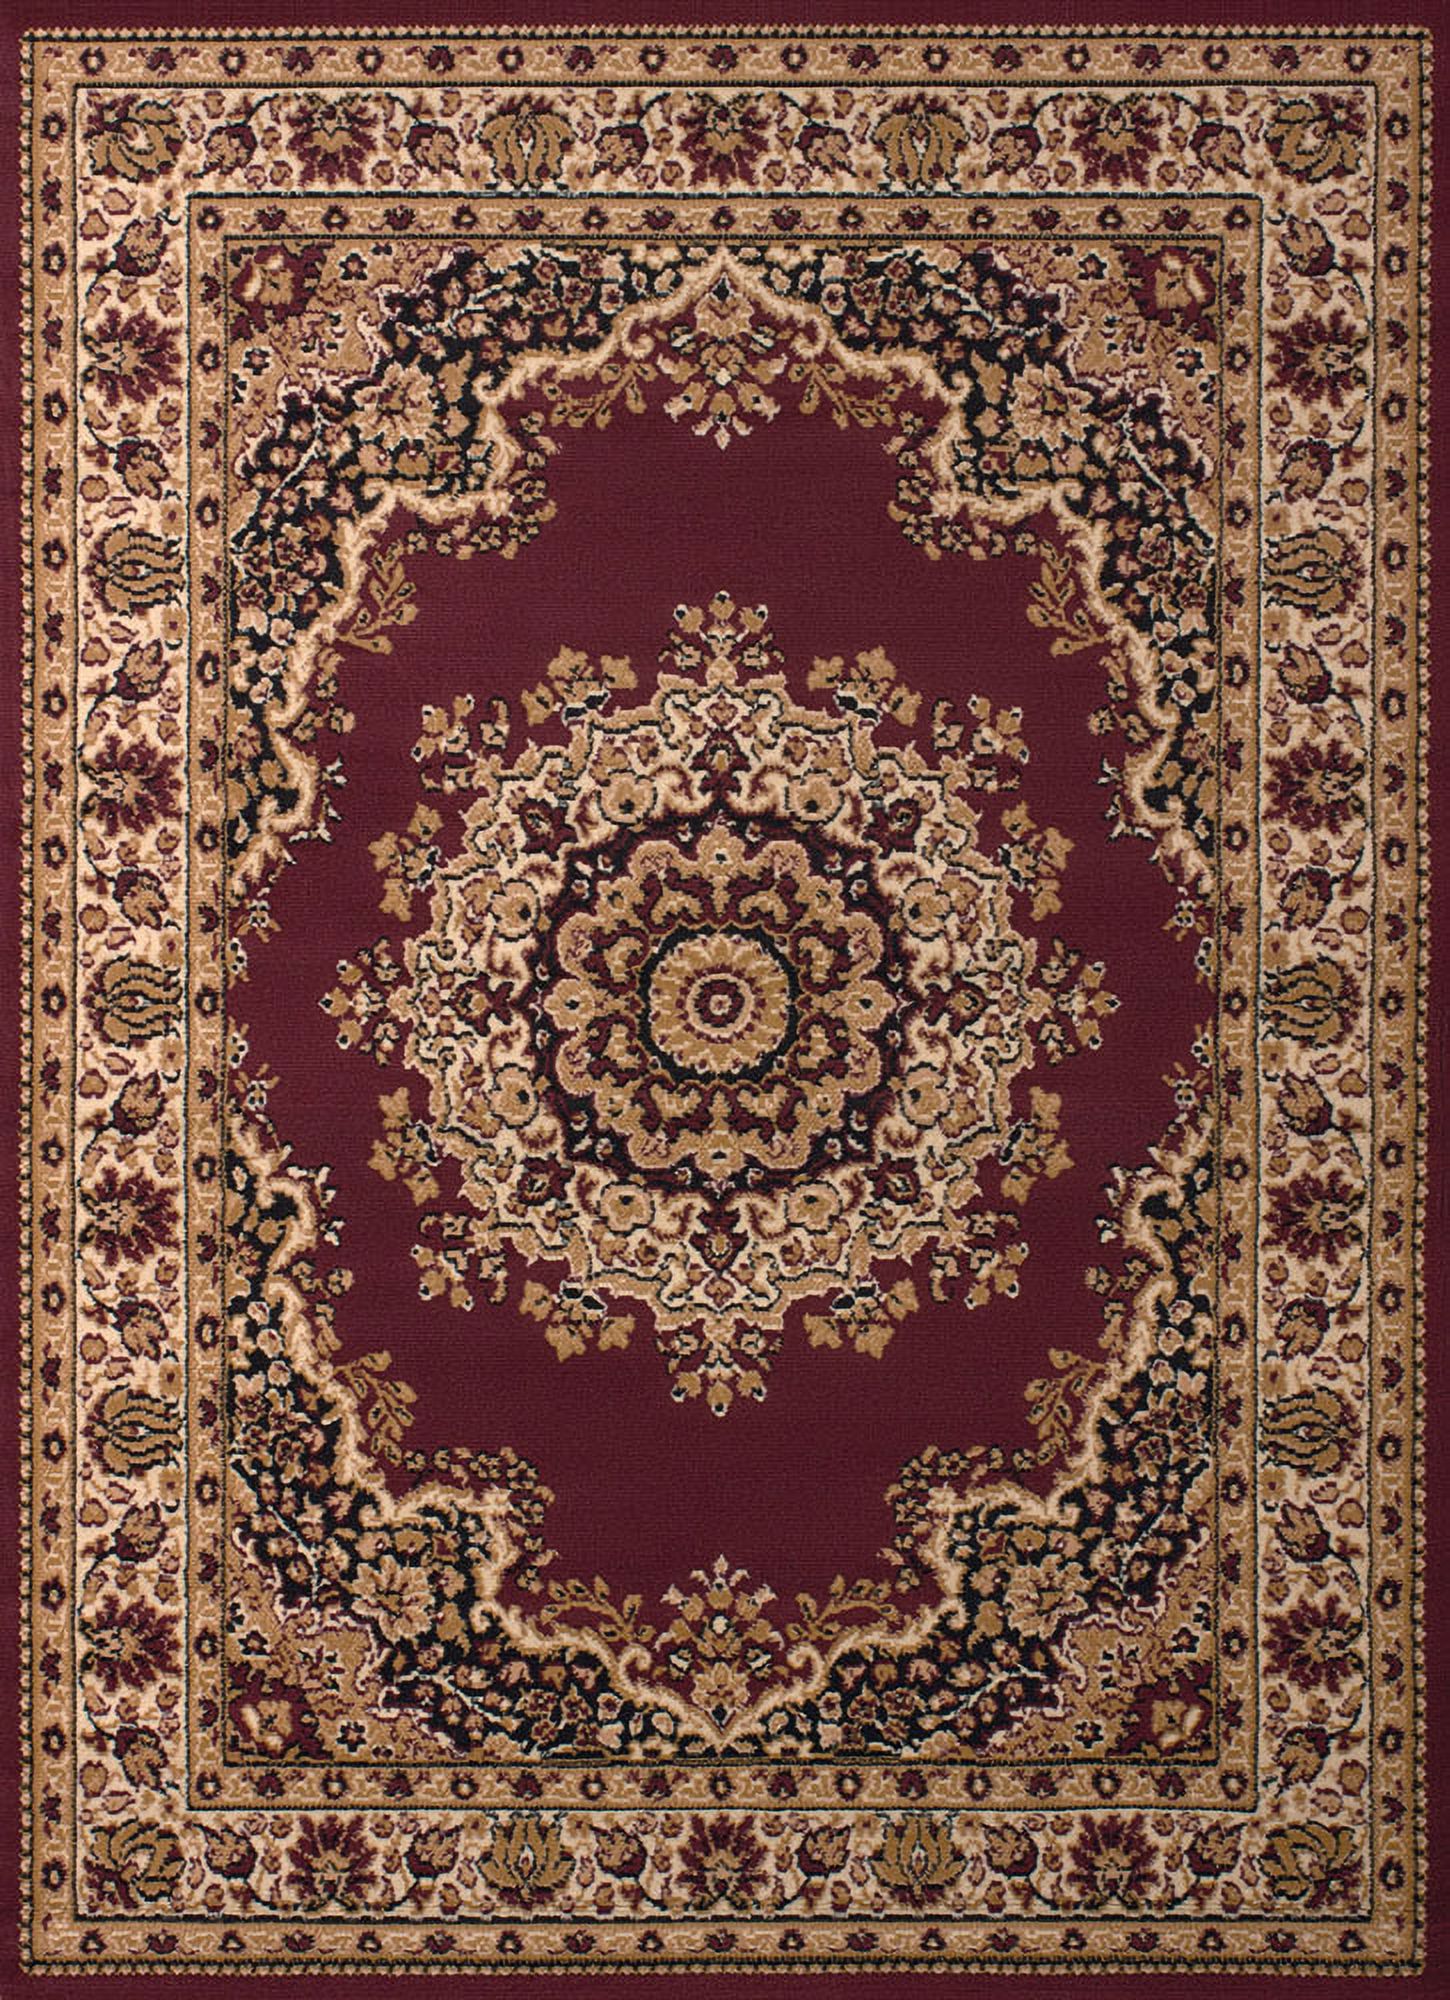 Designer Home Soft Traditional Oriental Area Rug with Center Medallion - Actual Size: 2' 3" x 7' 2" Rectangle (Burgundy) - image 2 of 5